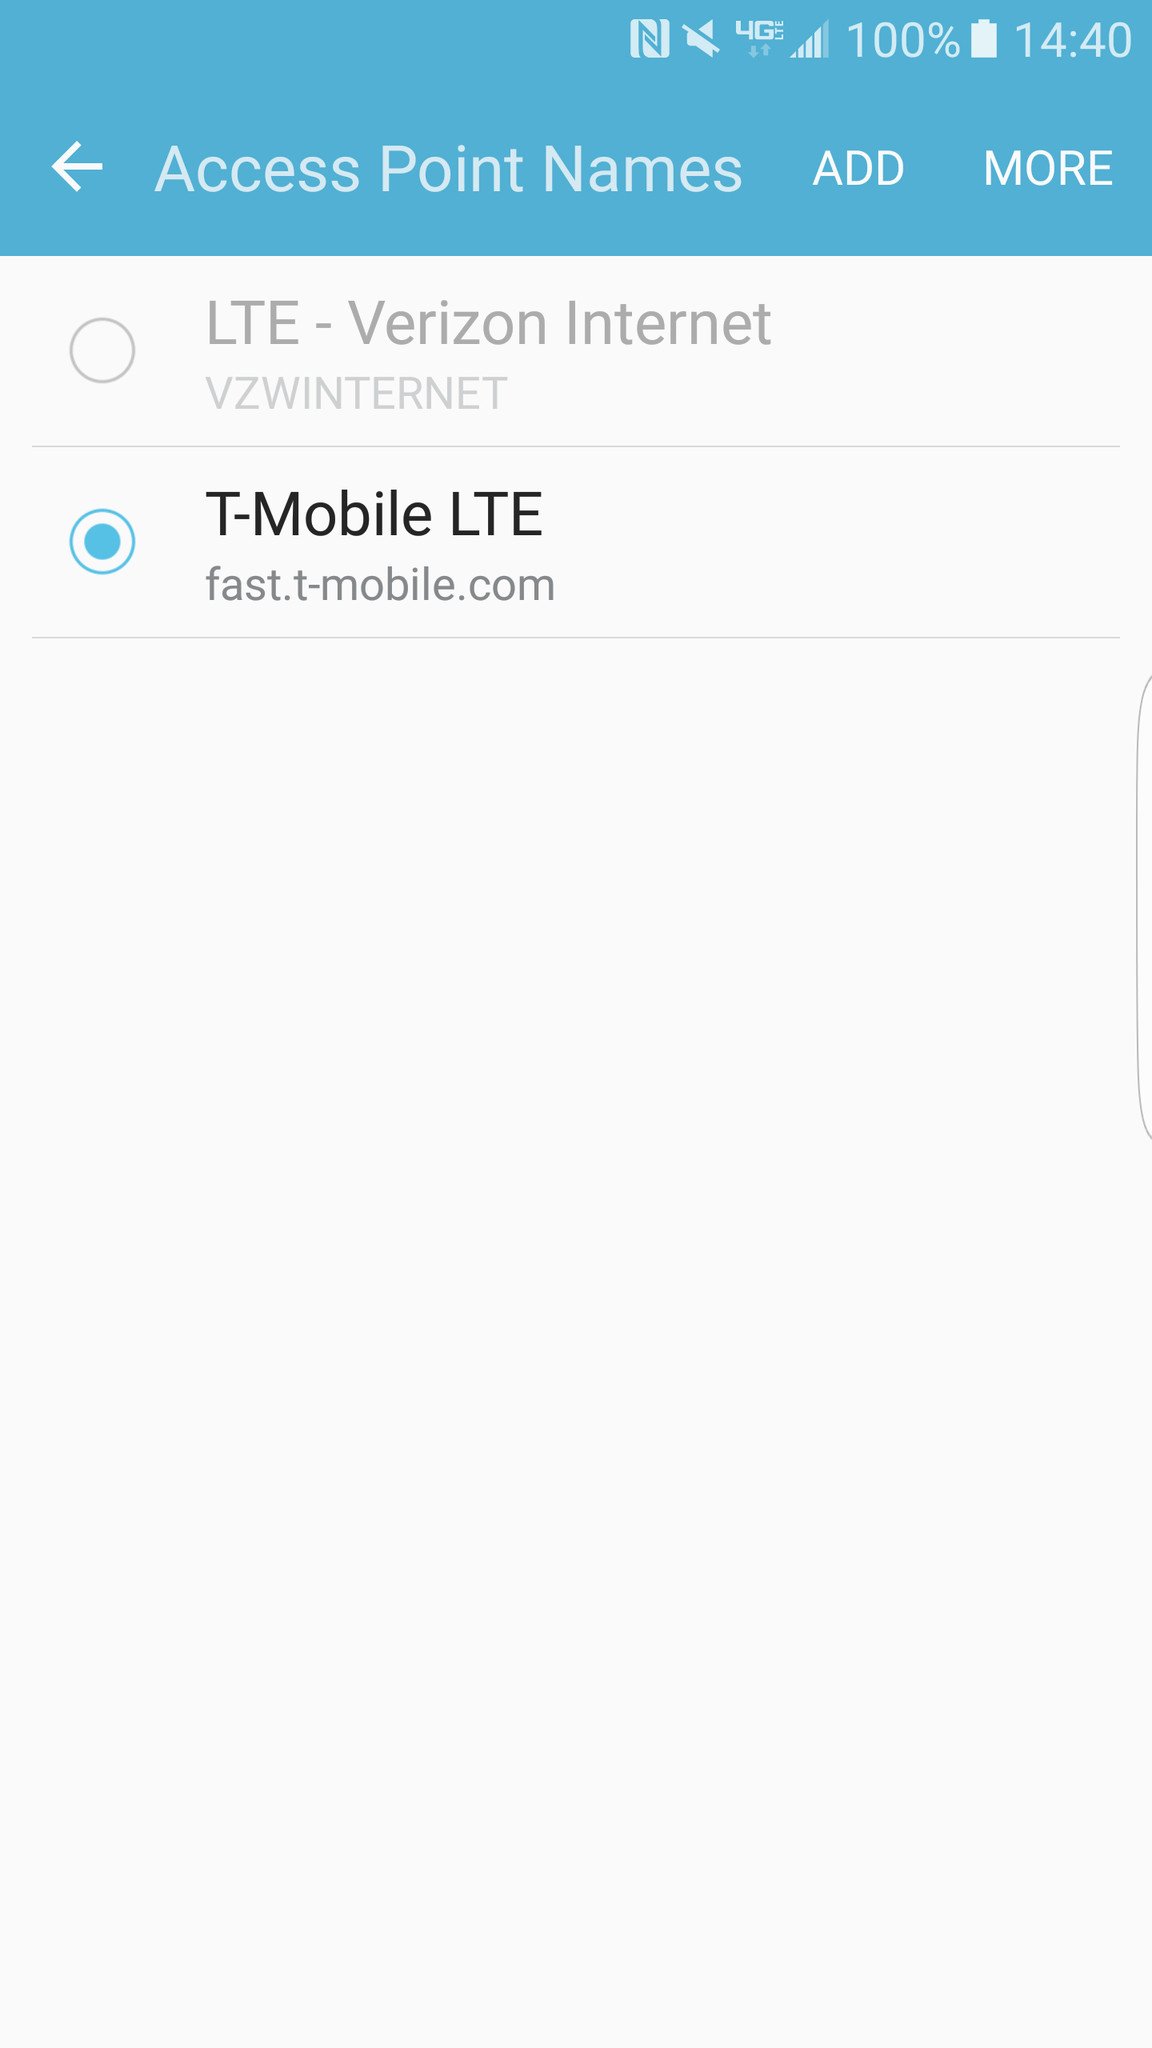 Will a Verizon phone work if I put a T-Mobile SIM card in it?